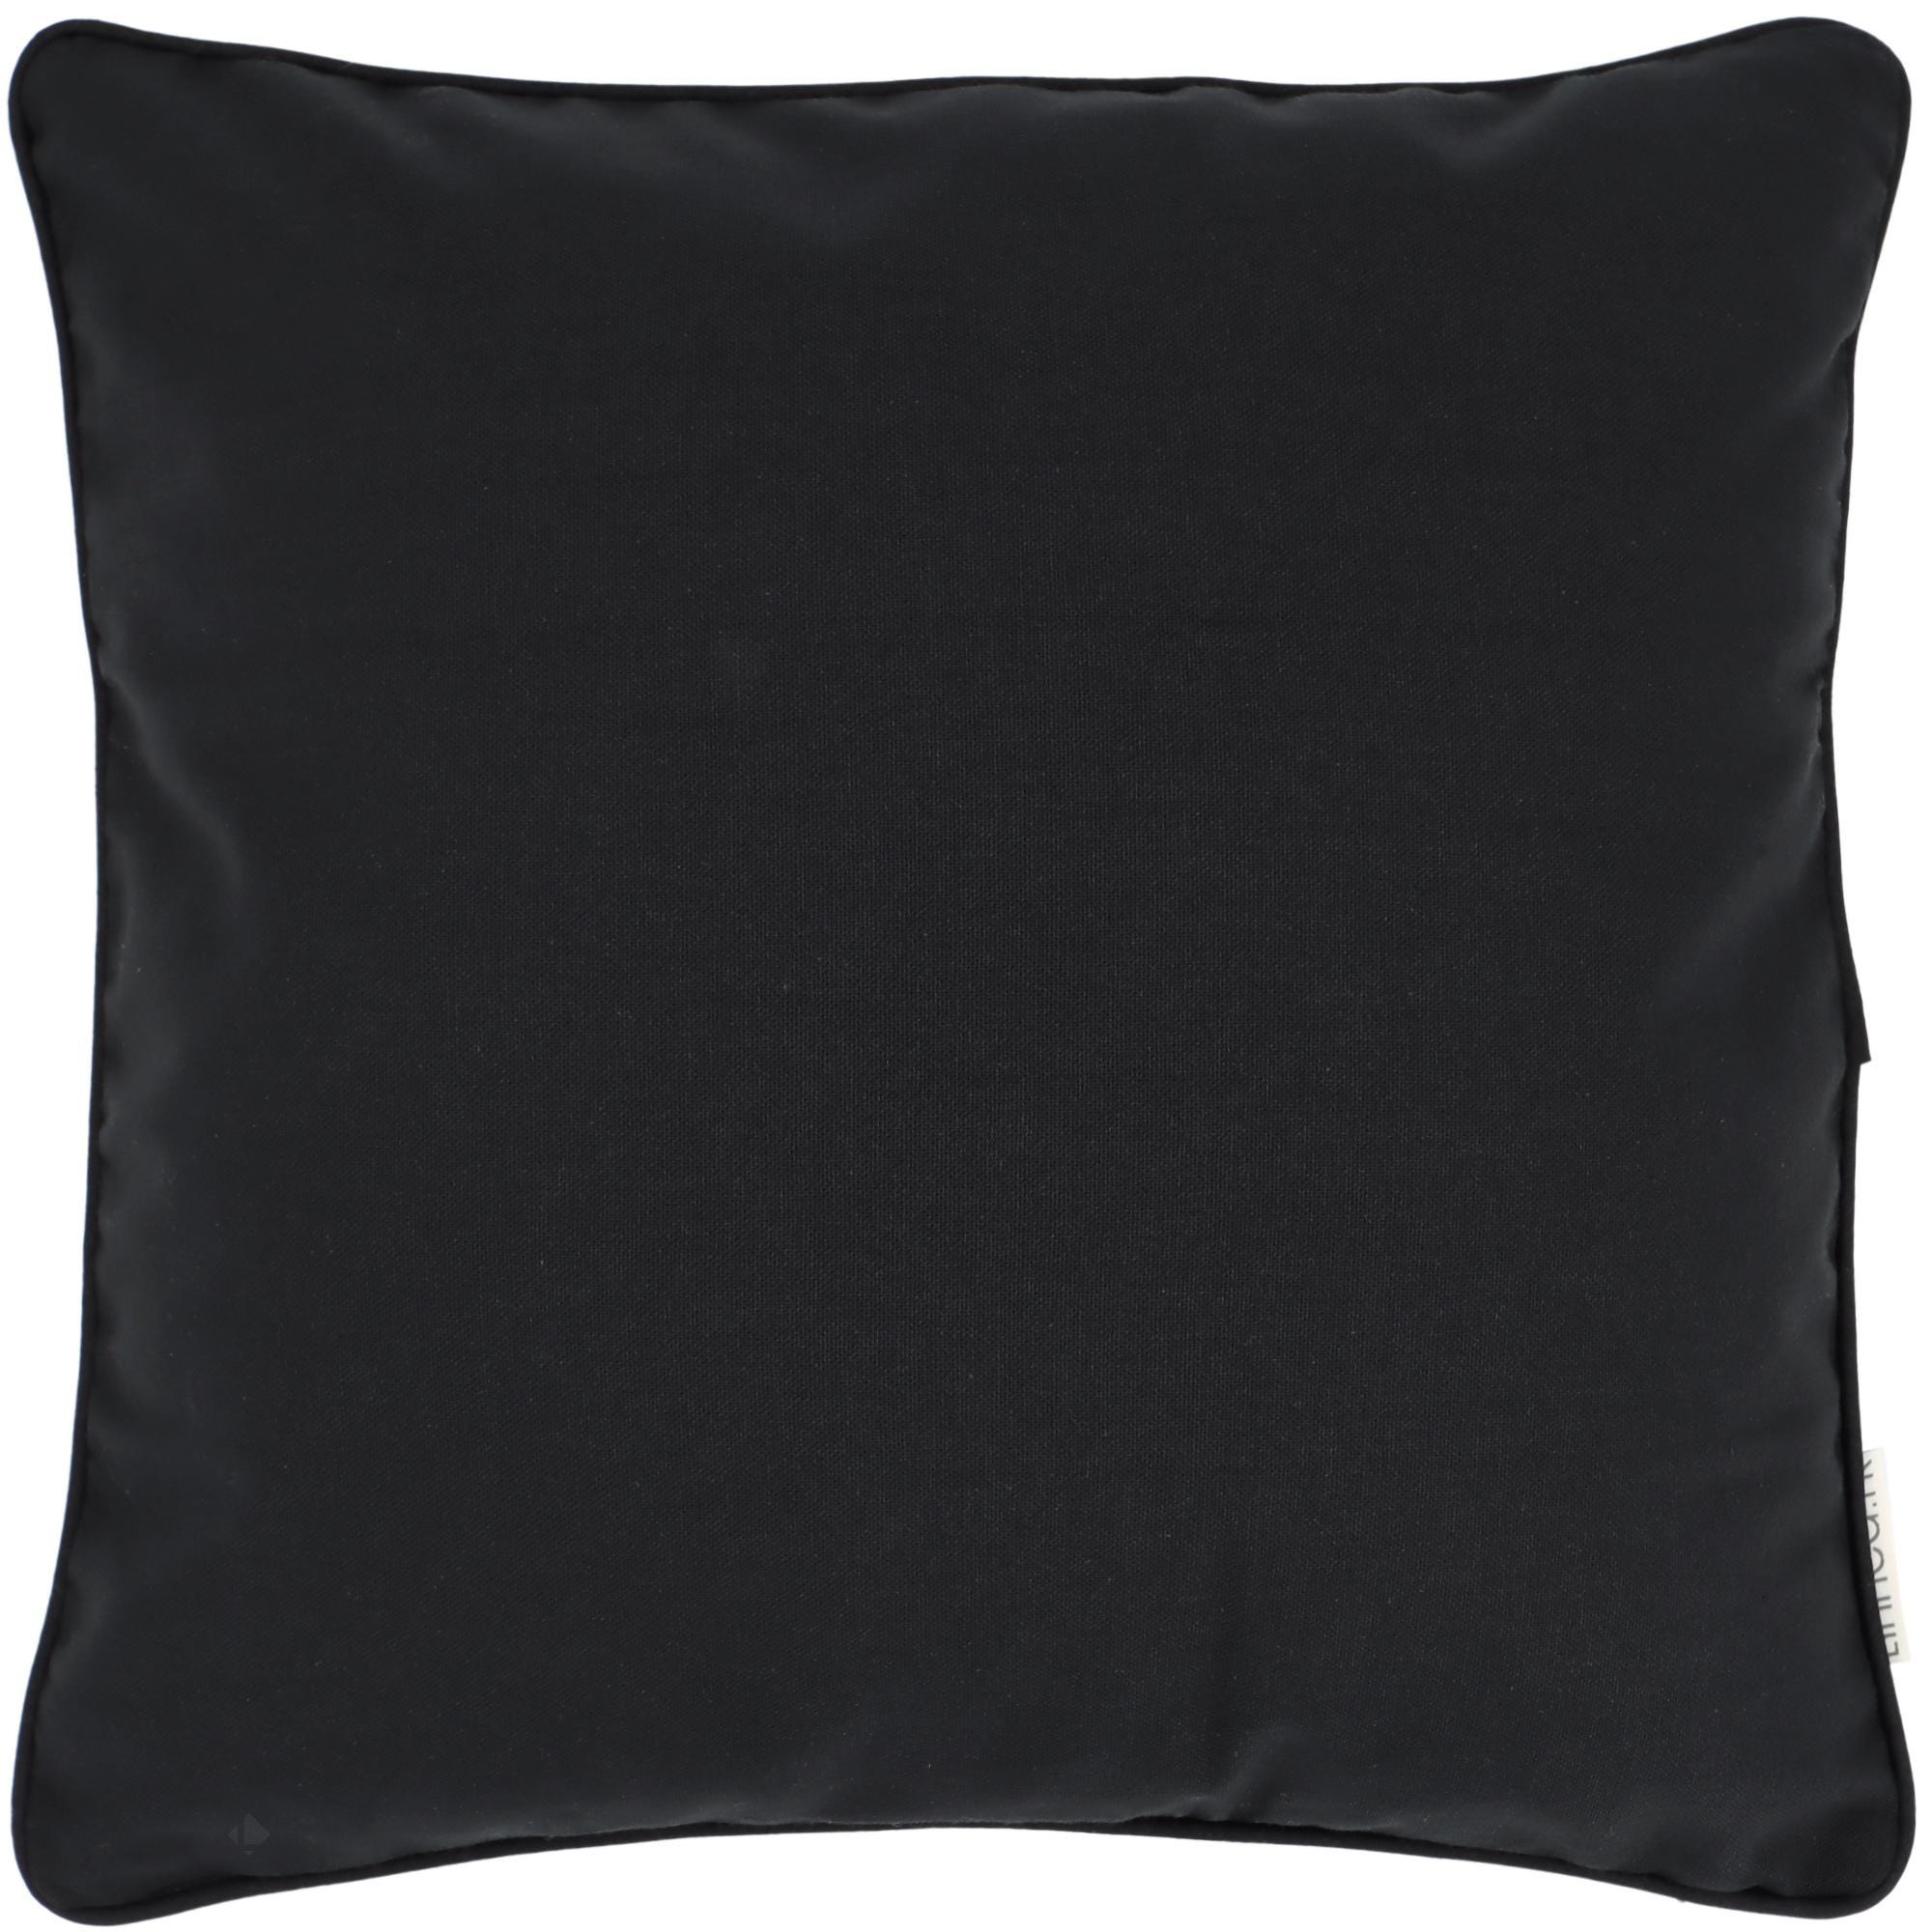 Coussin à recouvrir 45x70 cm, garnissage Fibres polyester - coussin Malin